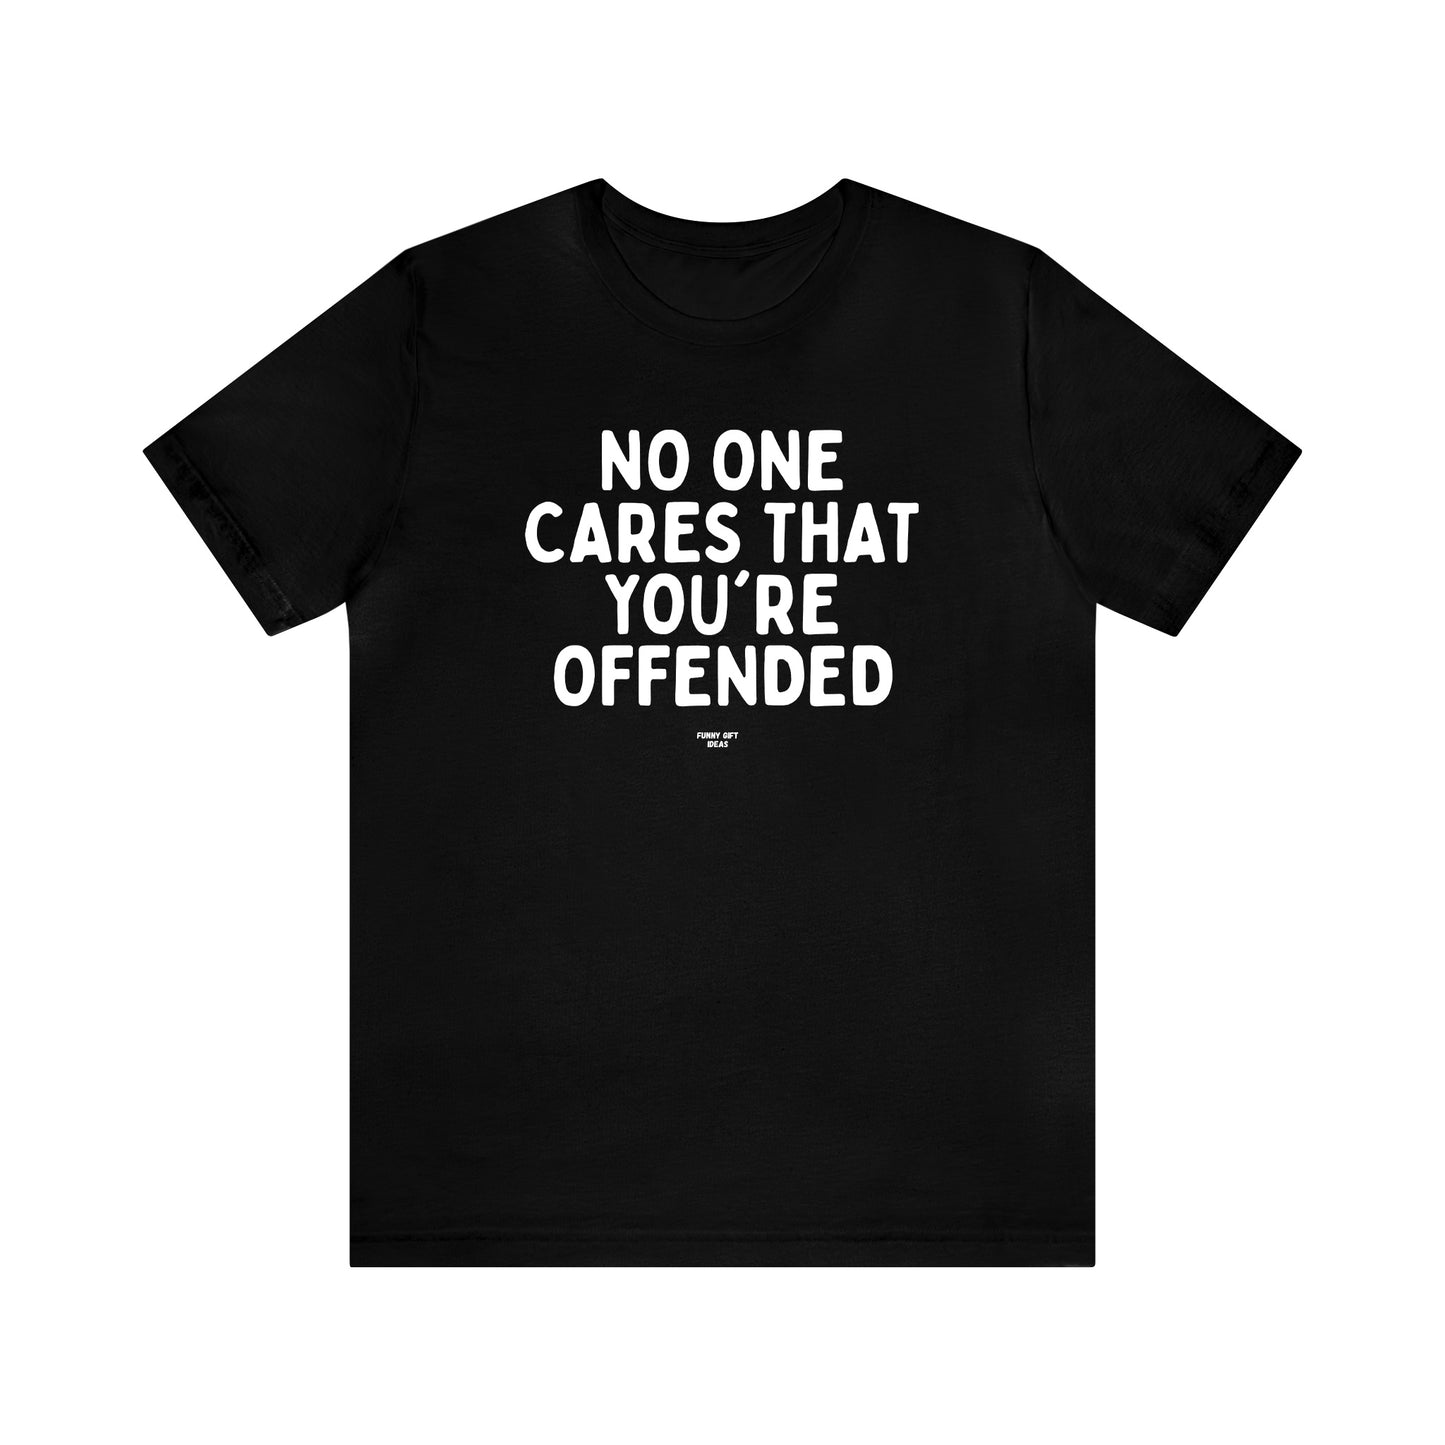 Mens T Shirts - No One Cares That You're Offended - Funny Men T Shirts